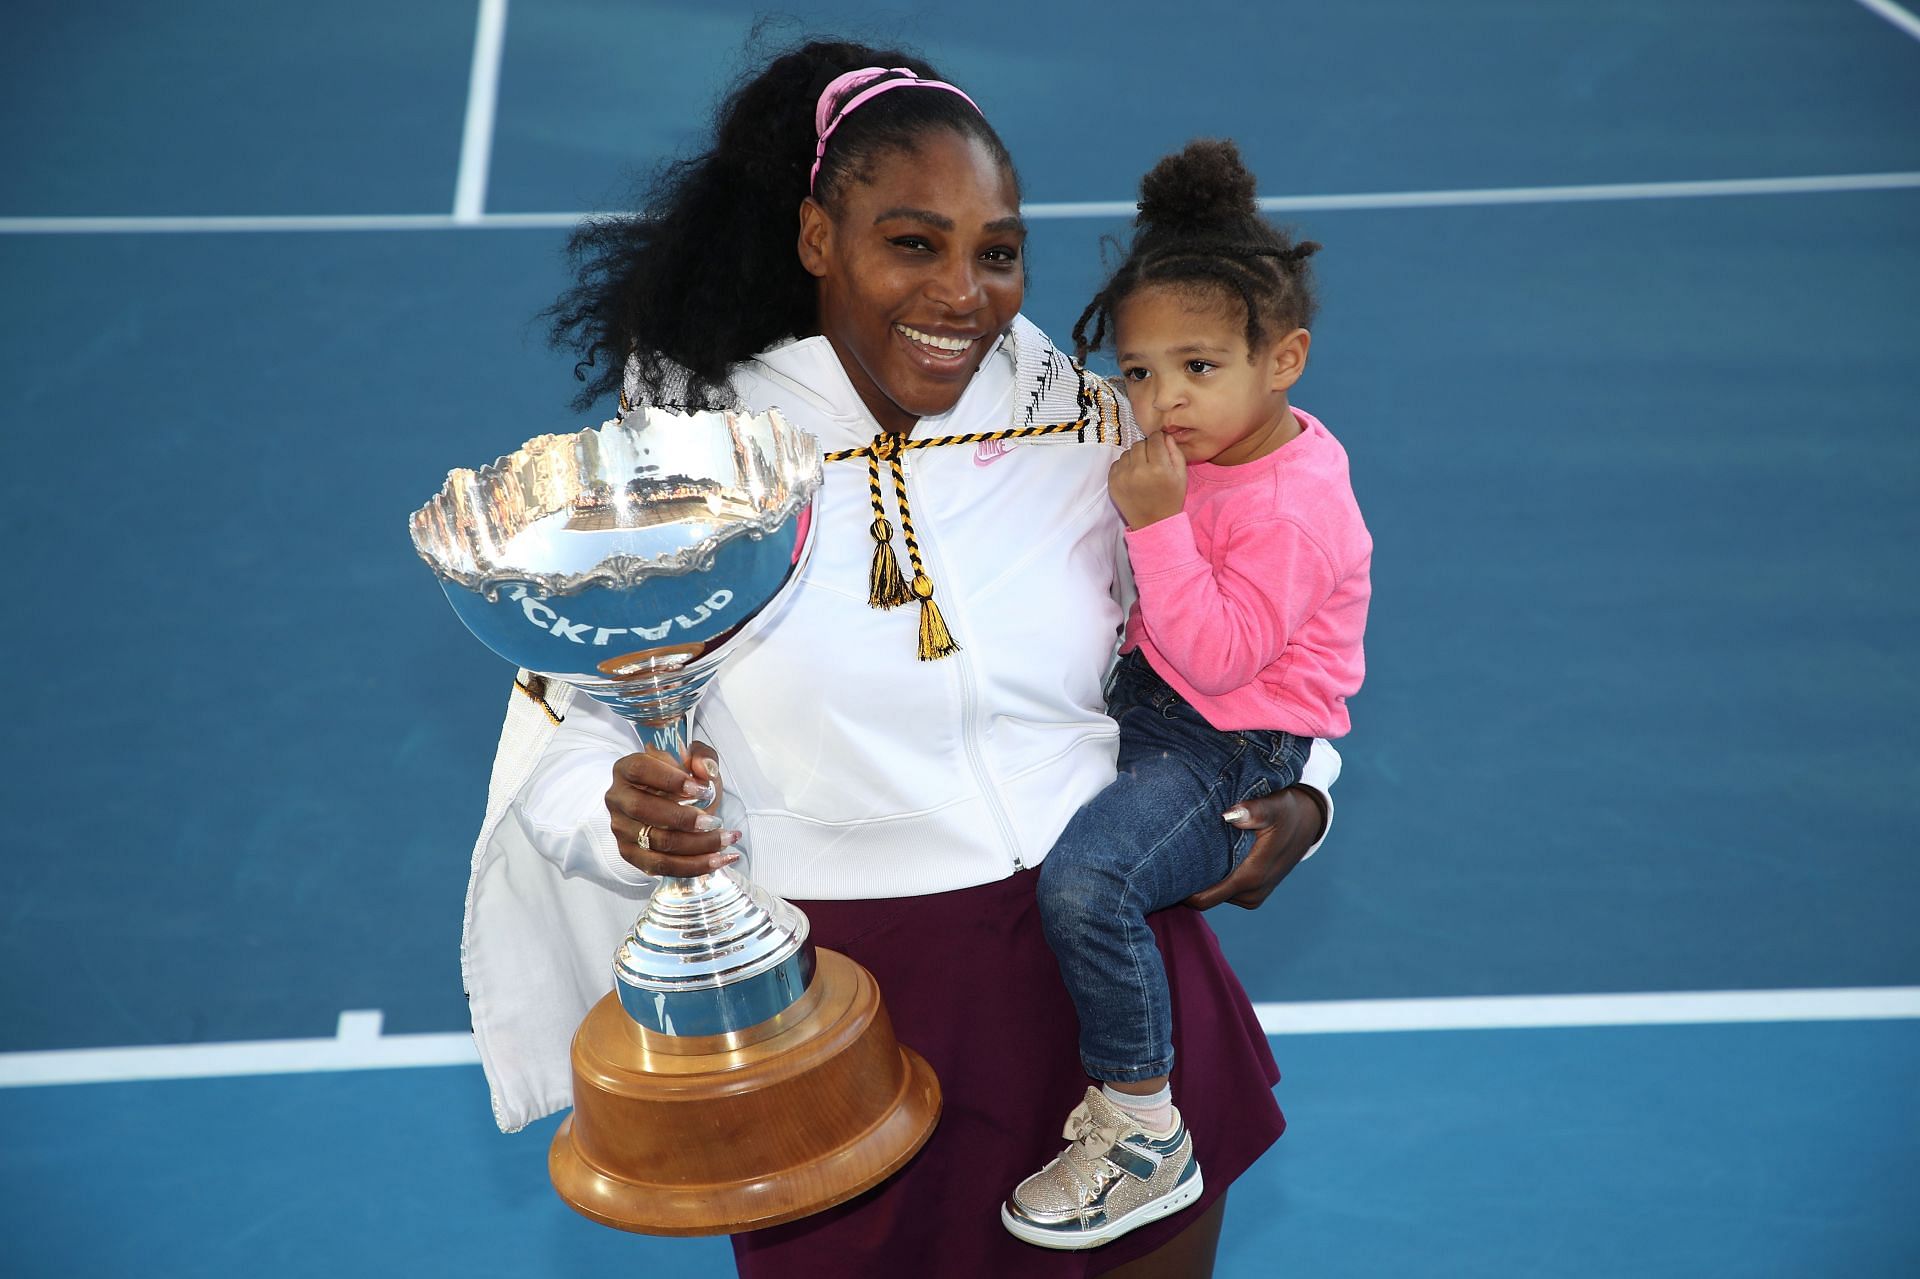 Like Olympia, Serena also started playing tennis at the age of four